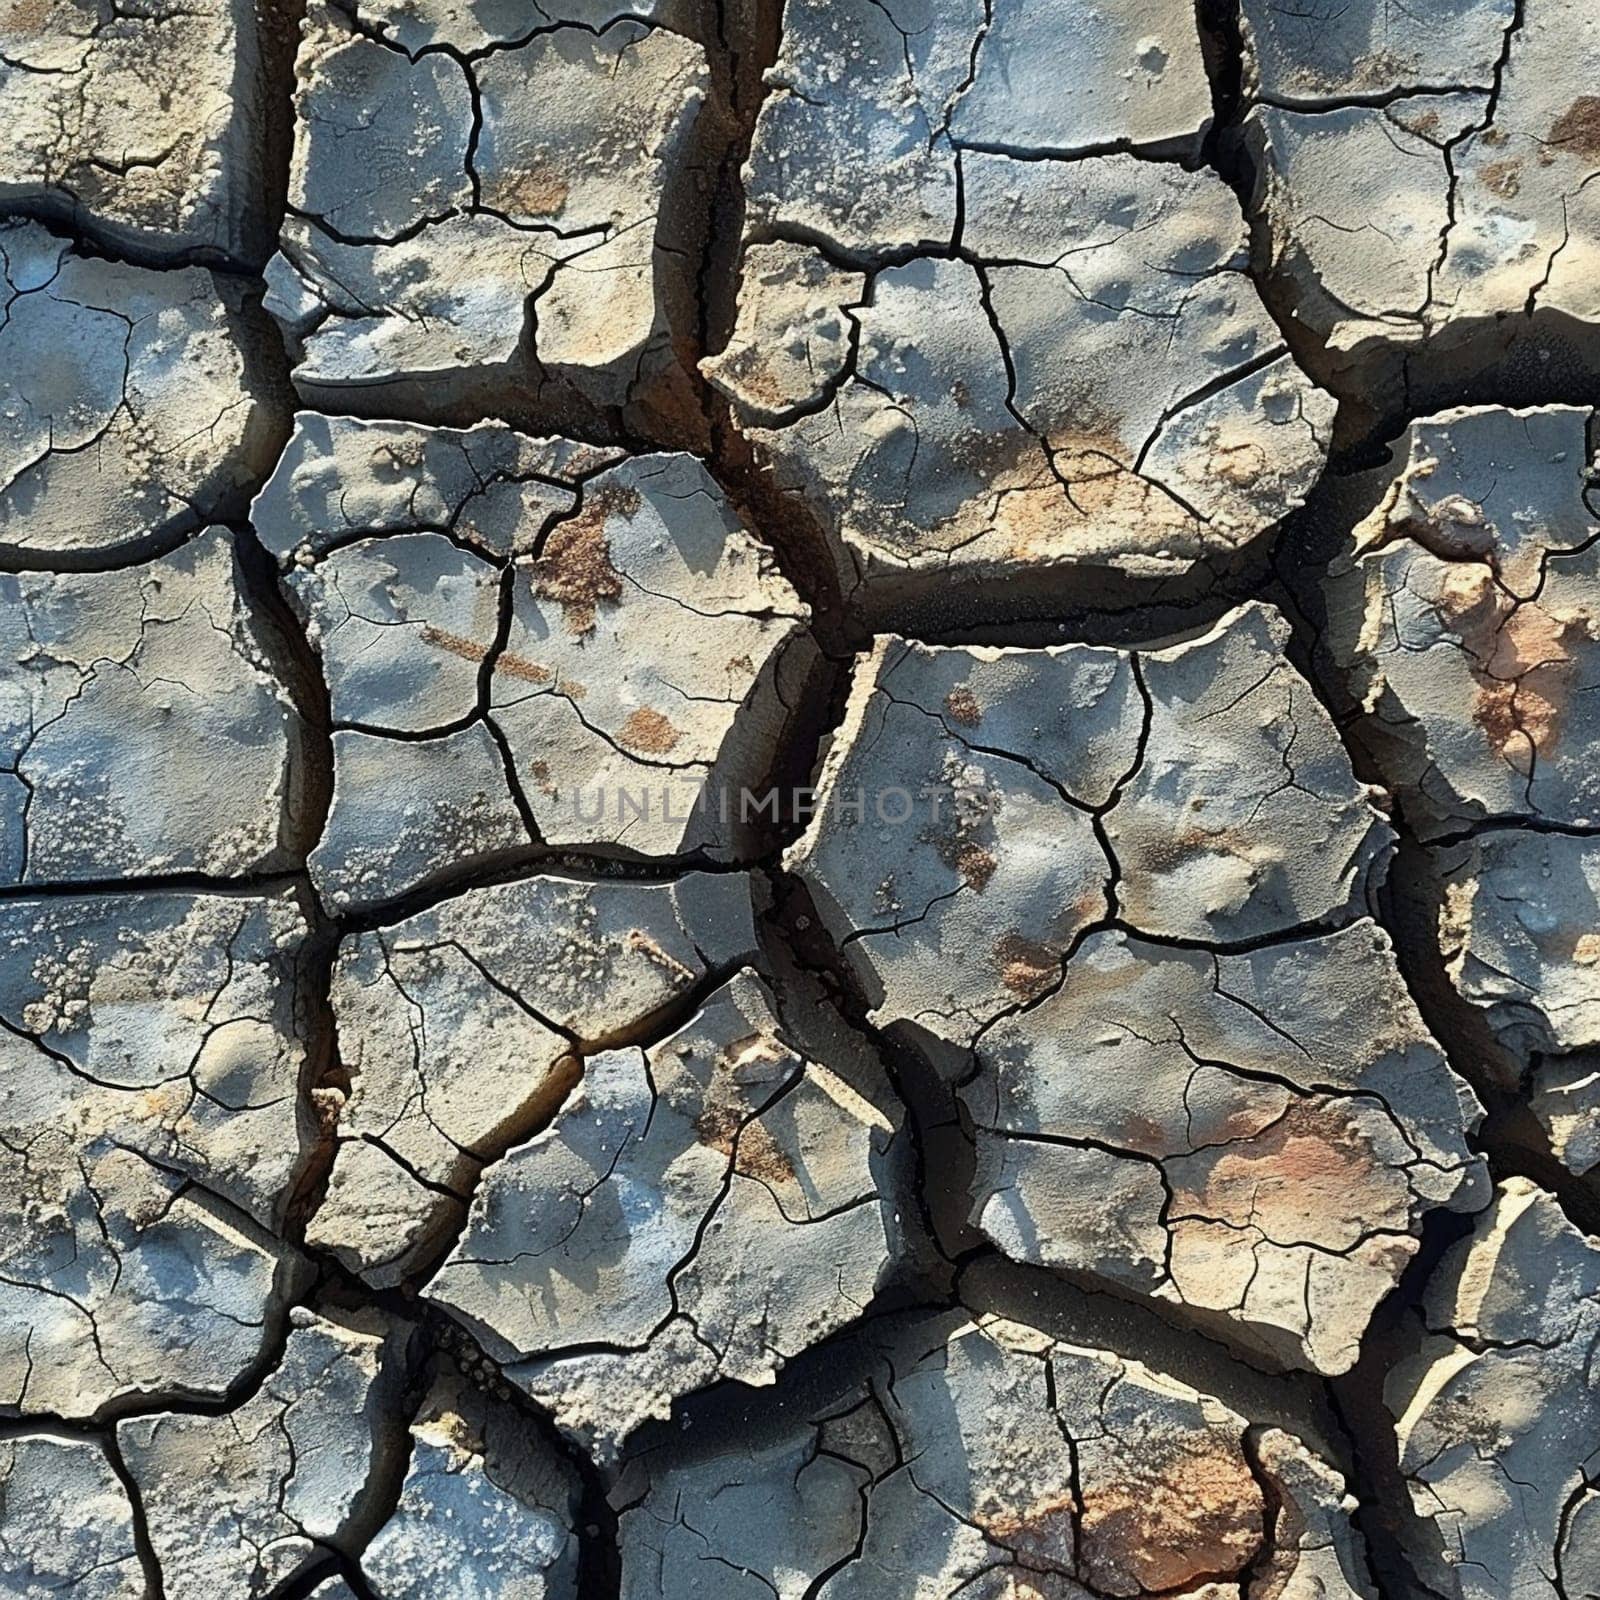 Cracked dry earth texture, symbolizing drought and environmental concern.